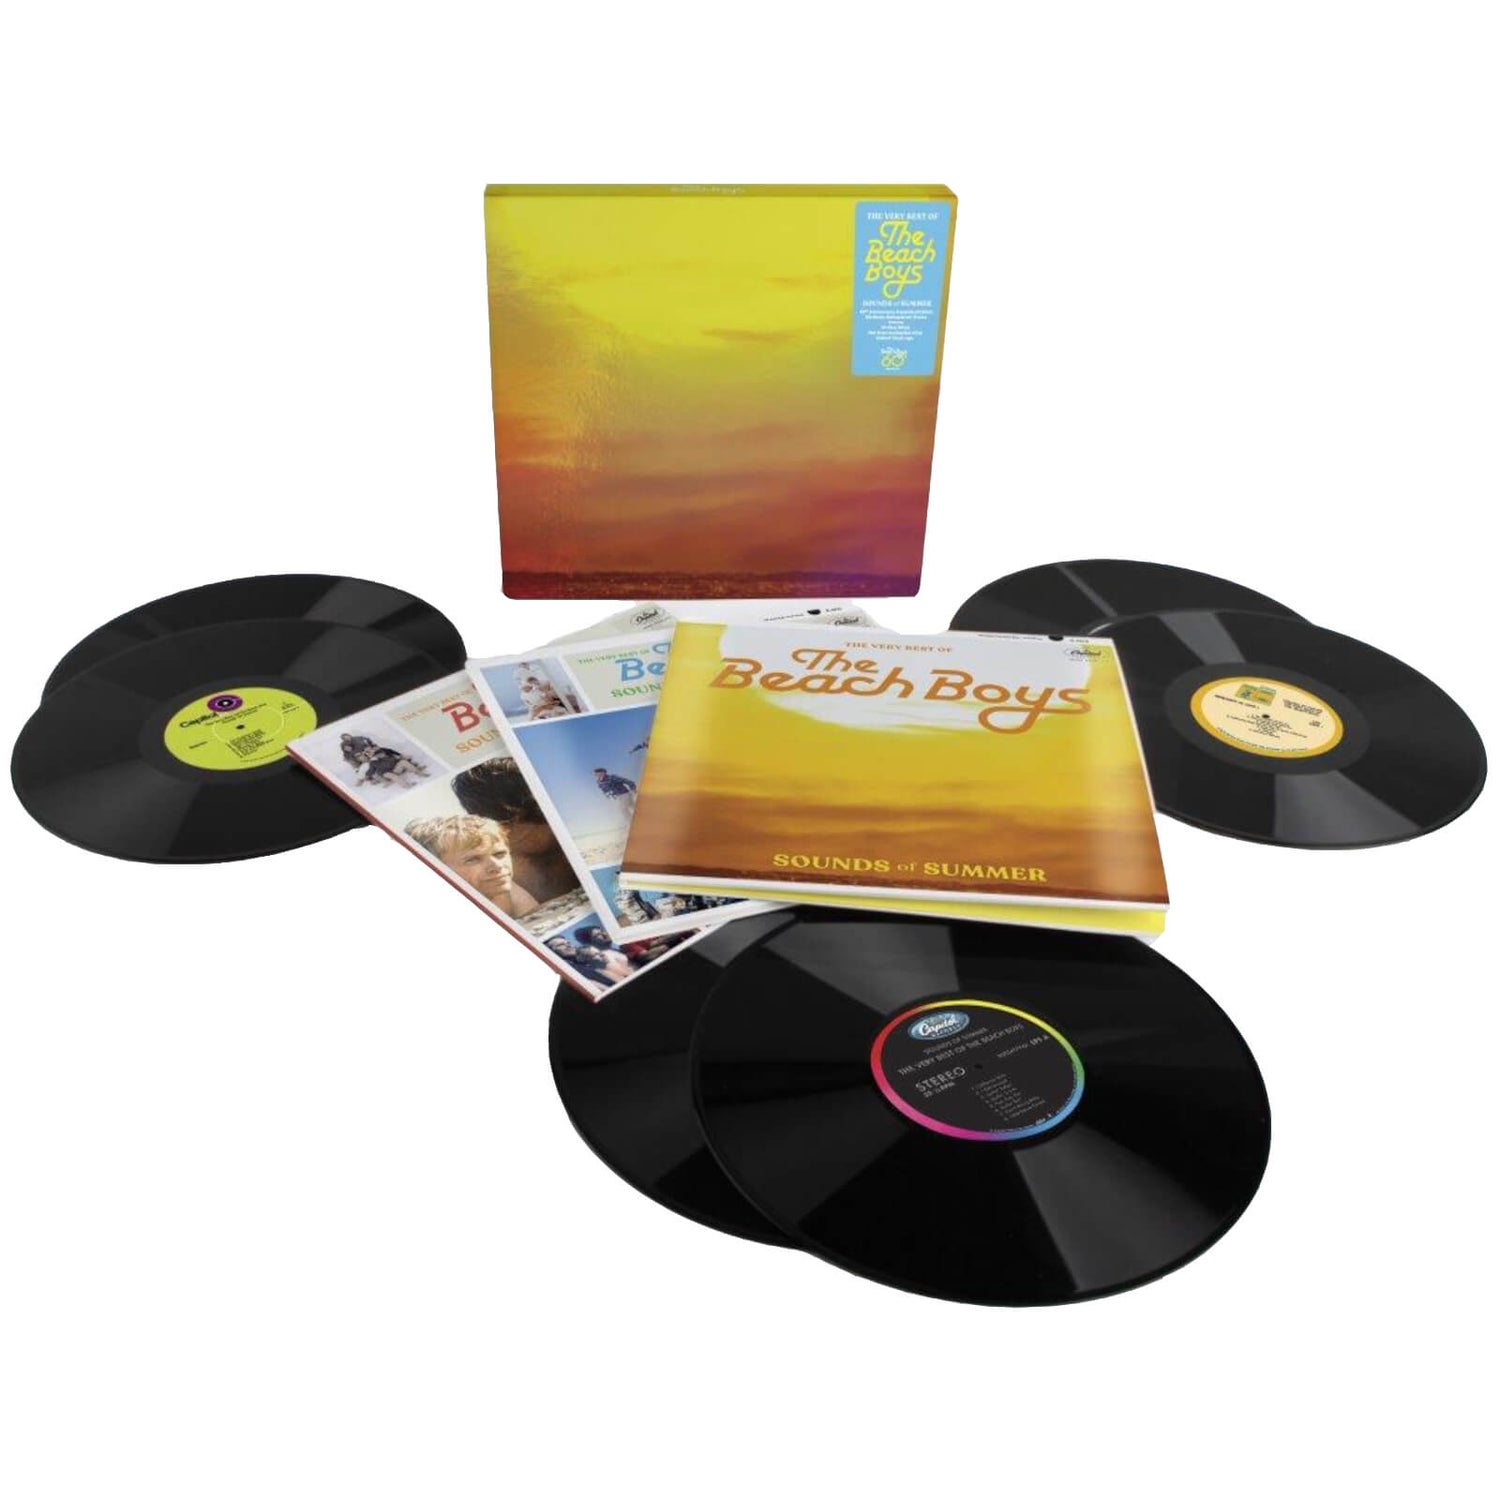 The Beach Boys - Sounds Of Summer Expanded Edition 60th Anniversary Vinyl Box Set